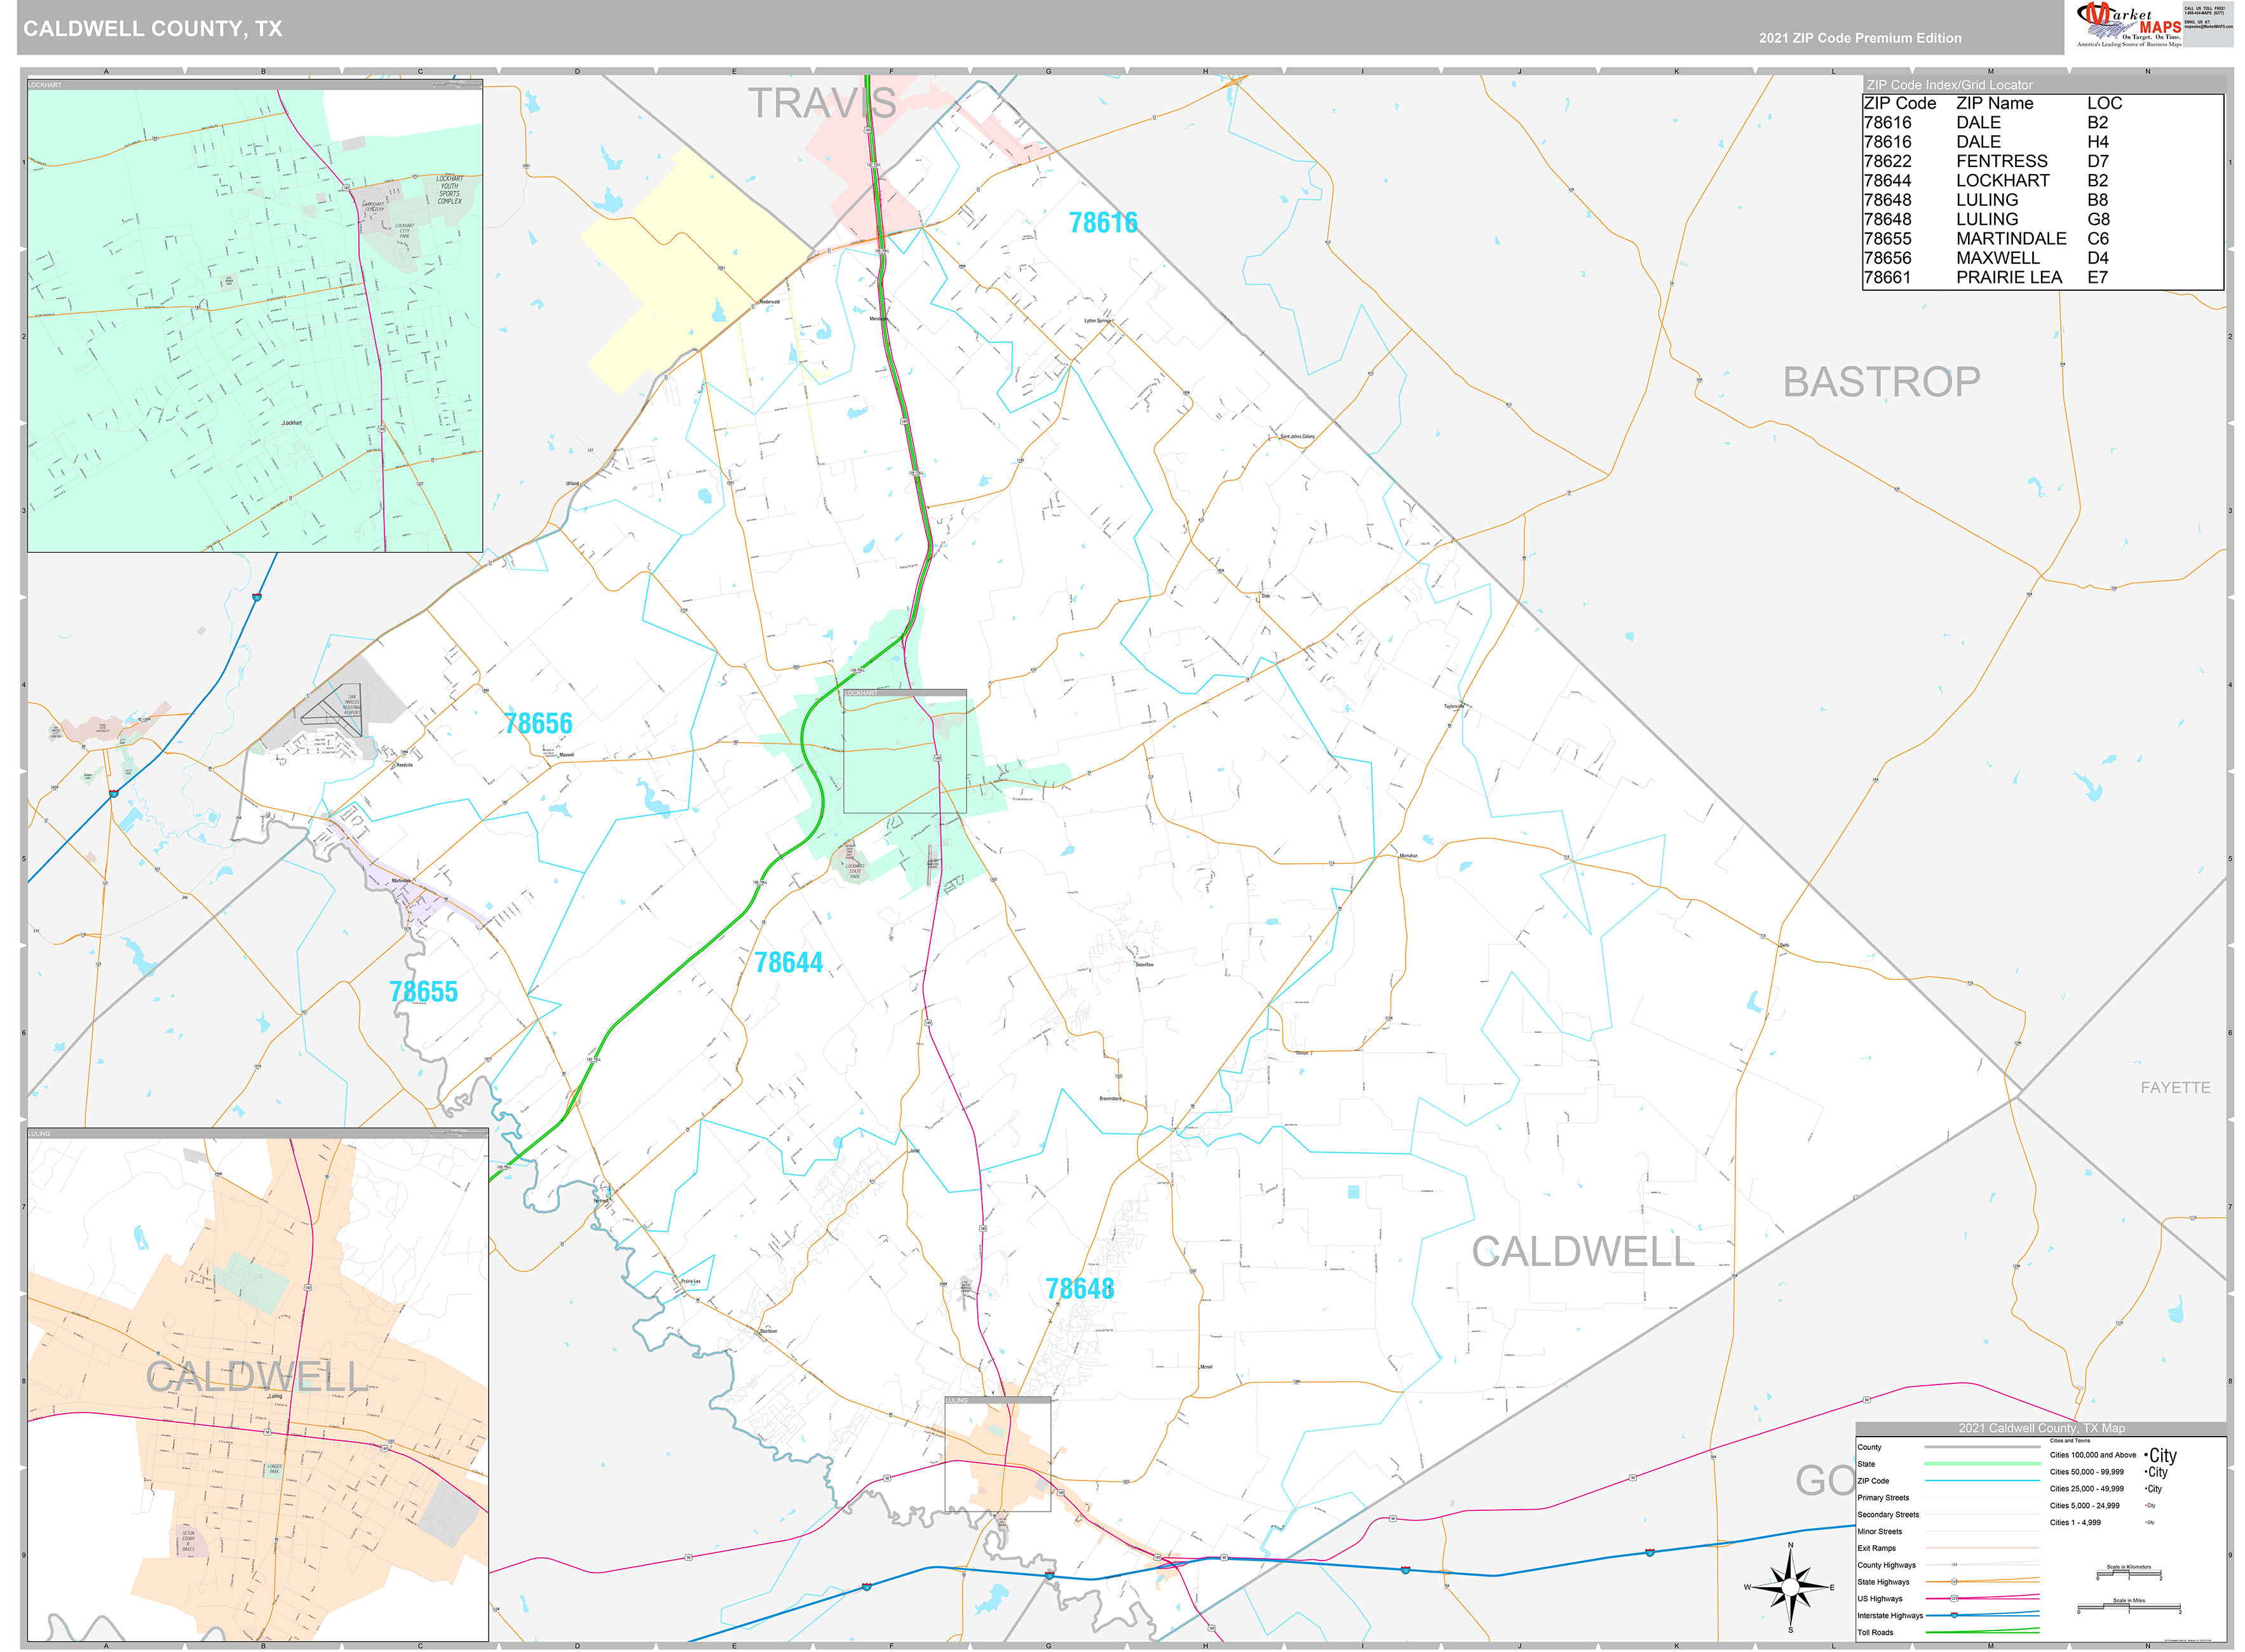 Caldwell County TX Wall Map Premium Style by MarketMAPS